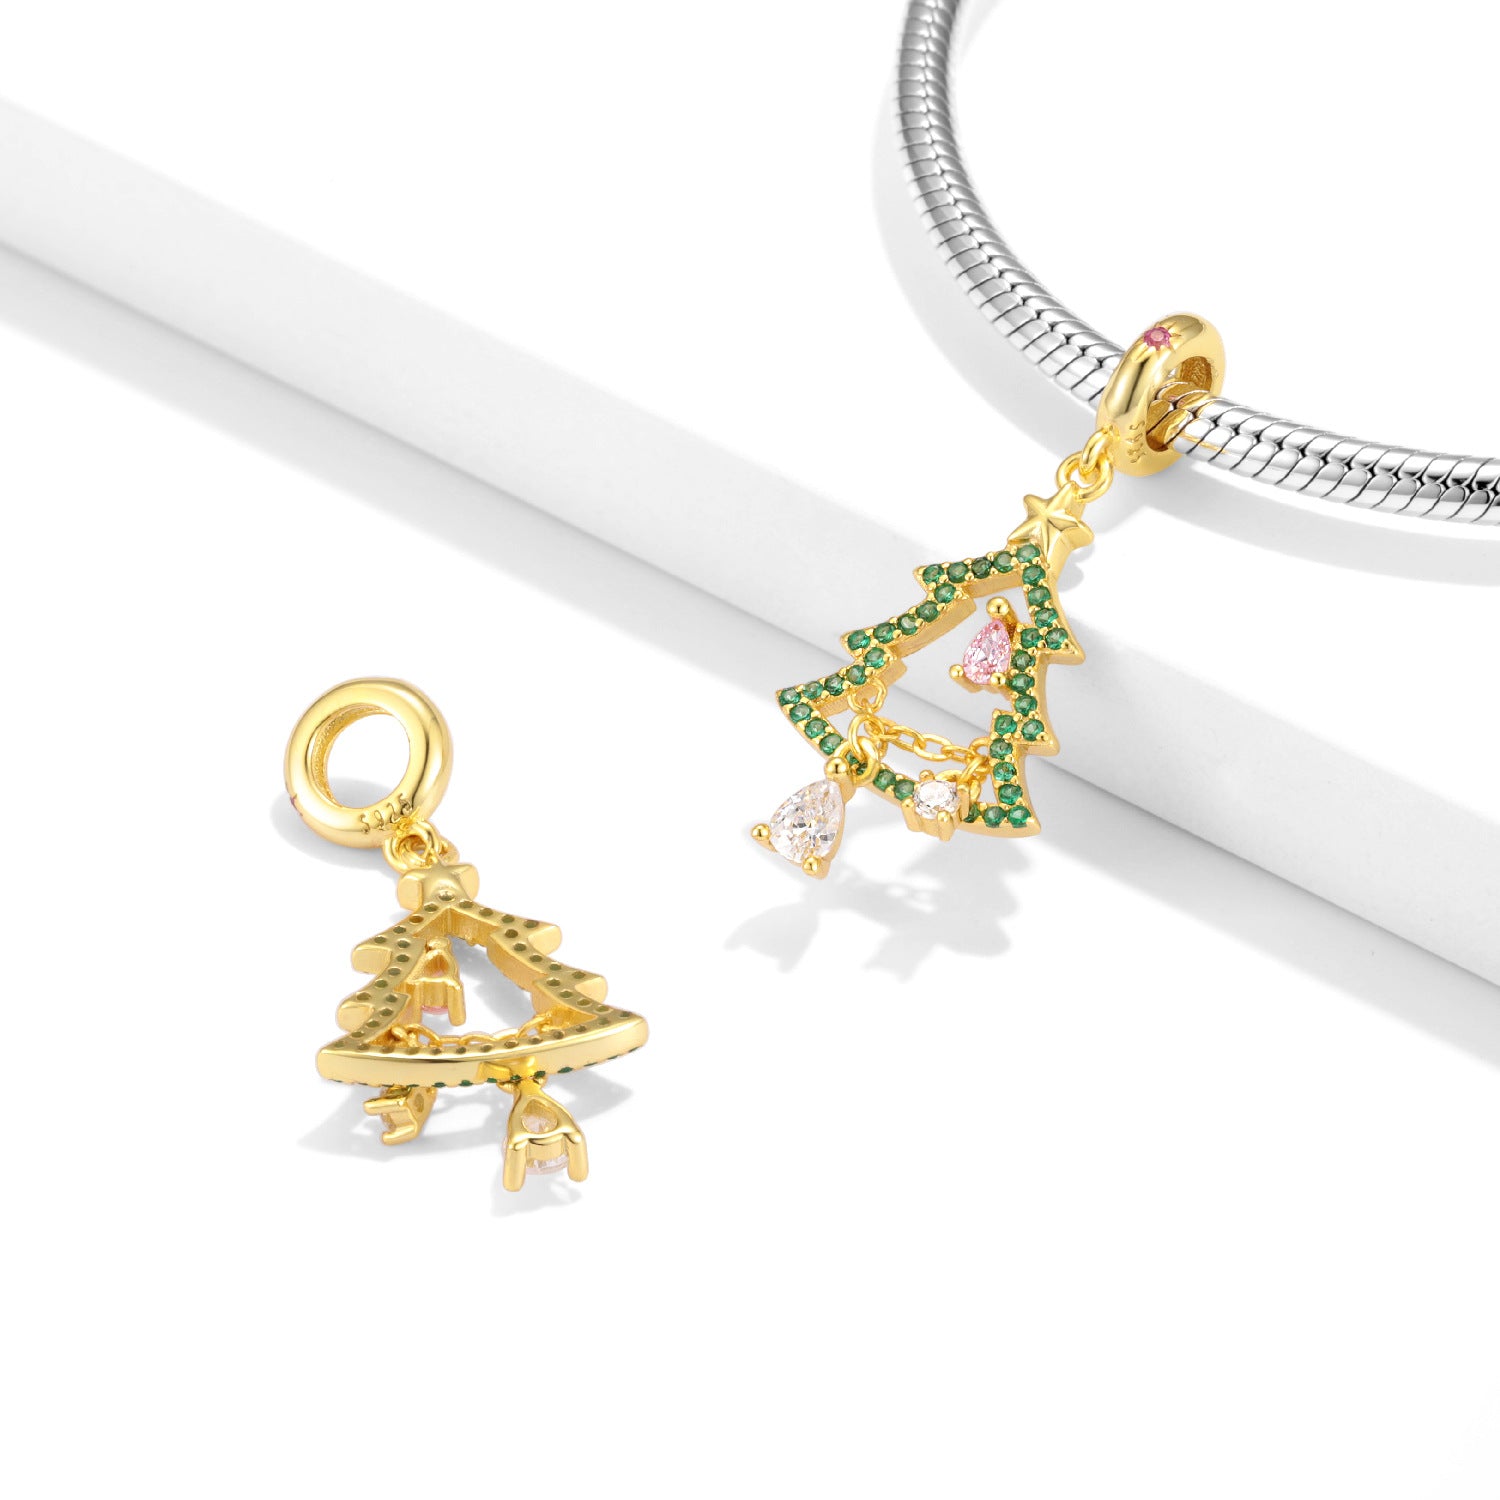 FairyLocus "Christmas Tree" Christmas Tree Sterling Silver Necklace Jewelry Gift FLCYNL10 FairyLocus